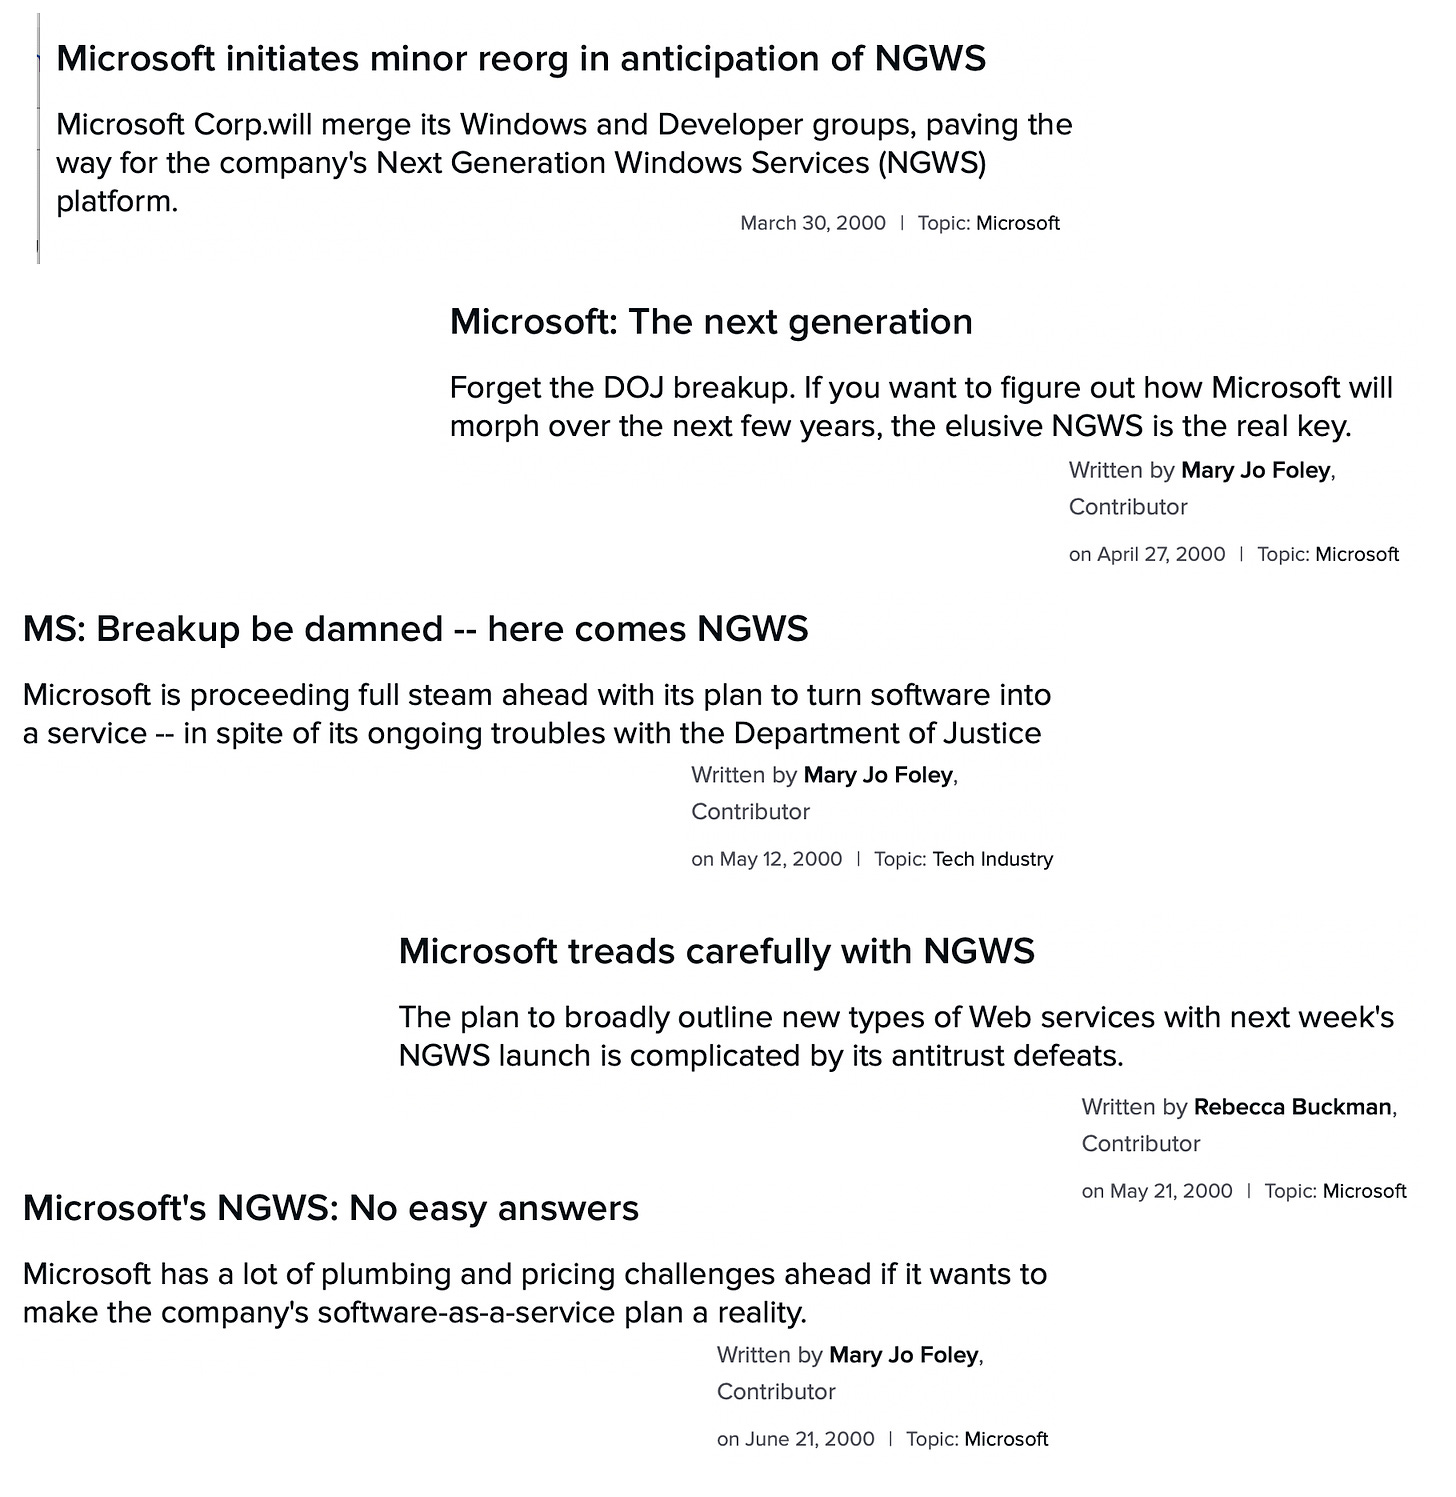 Microsoft initiates minor reorg in anticipation of NGWS Microsoft Corp.will merge its Windows and Developer groups, paving the way for the company's Next Generation Windows Services (NGWS) platform. March 30, 2000 | Topic: Microsoft Microsoft: The next generation Forget the DOJ breakup. If you want to figure out how Microsoft will morph over the next few years, the elusive NGWS is the real key. Written by Mary Jo Foley, Contributor on April 27, 2000 | Topic: Microsoft MS: Breakup be damned - here comes NGWS Microsoft is proceeding full steam ahead with its plan to turn software into a service - in spite of its ongoing troubles with the Department of Justice Written by Mary Jo Foley, Contributor on May 12, 2000 | Topic: Tech Industry Microsoft treads carefully with NGWS The plan to broadly outline new types of Web services with next week's NGWS launch is complicated by its antitrust defeats. Written by Rebecca Buckman, Contributor on May 21, 2000 | Topic: Microsoft Microsoft's NGWS: No easy answers Microsoft has a lot of plumbing and pricing challenges ahead if it wants to make the company's software-as-a-service plan a reality. Written by Mary Jo Foley, Contributor on June 21. 2000 | Topic: Microsoft